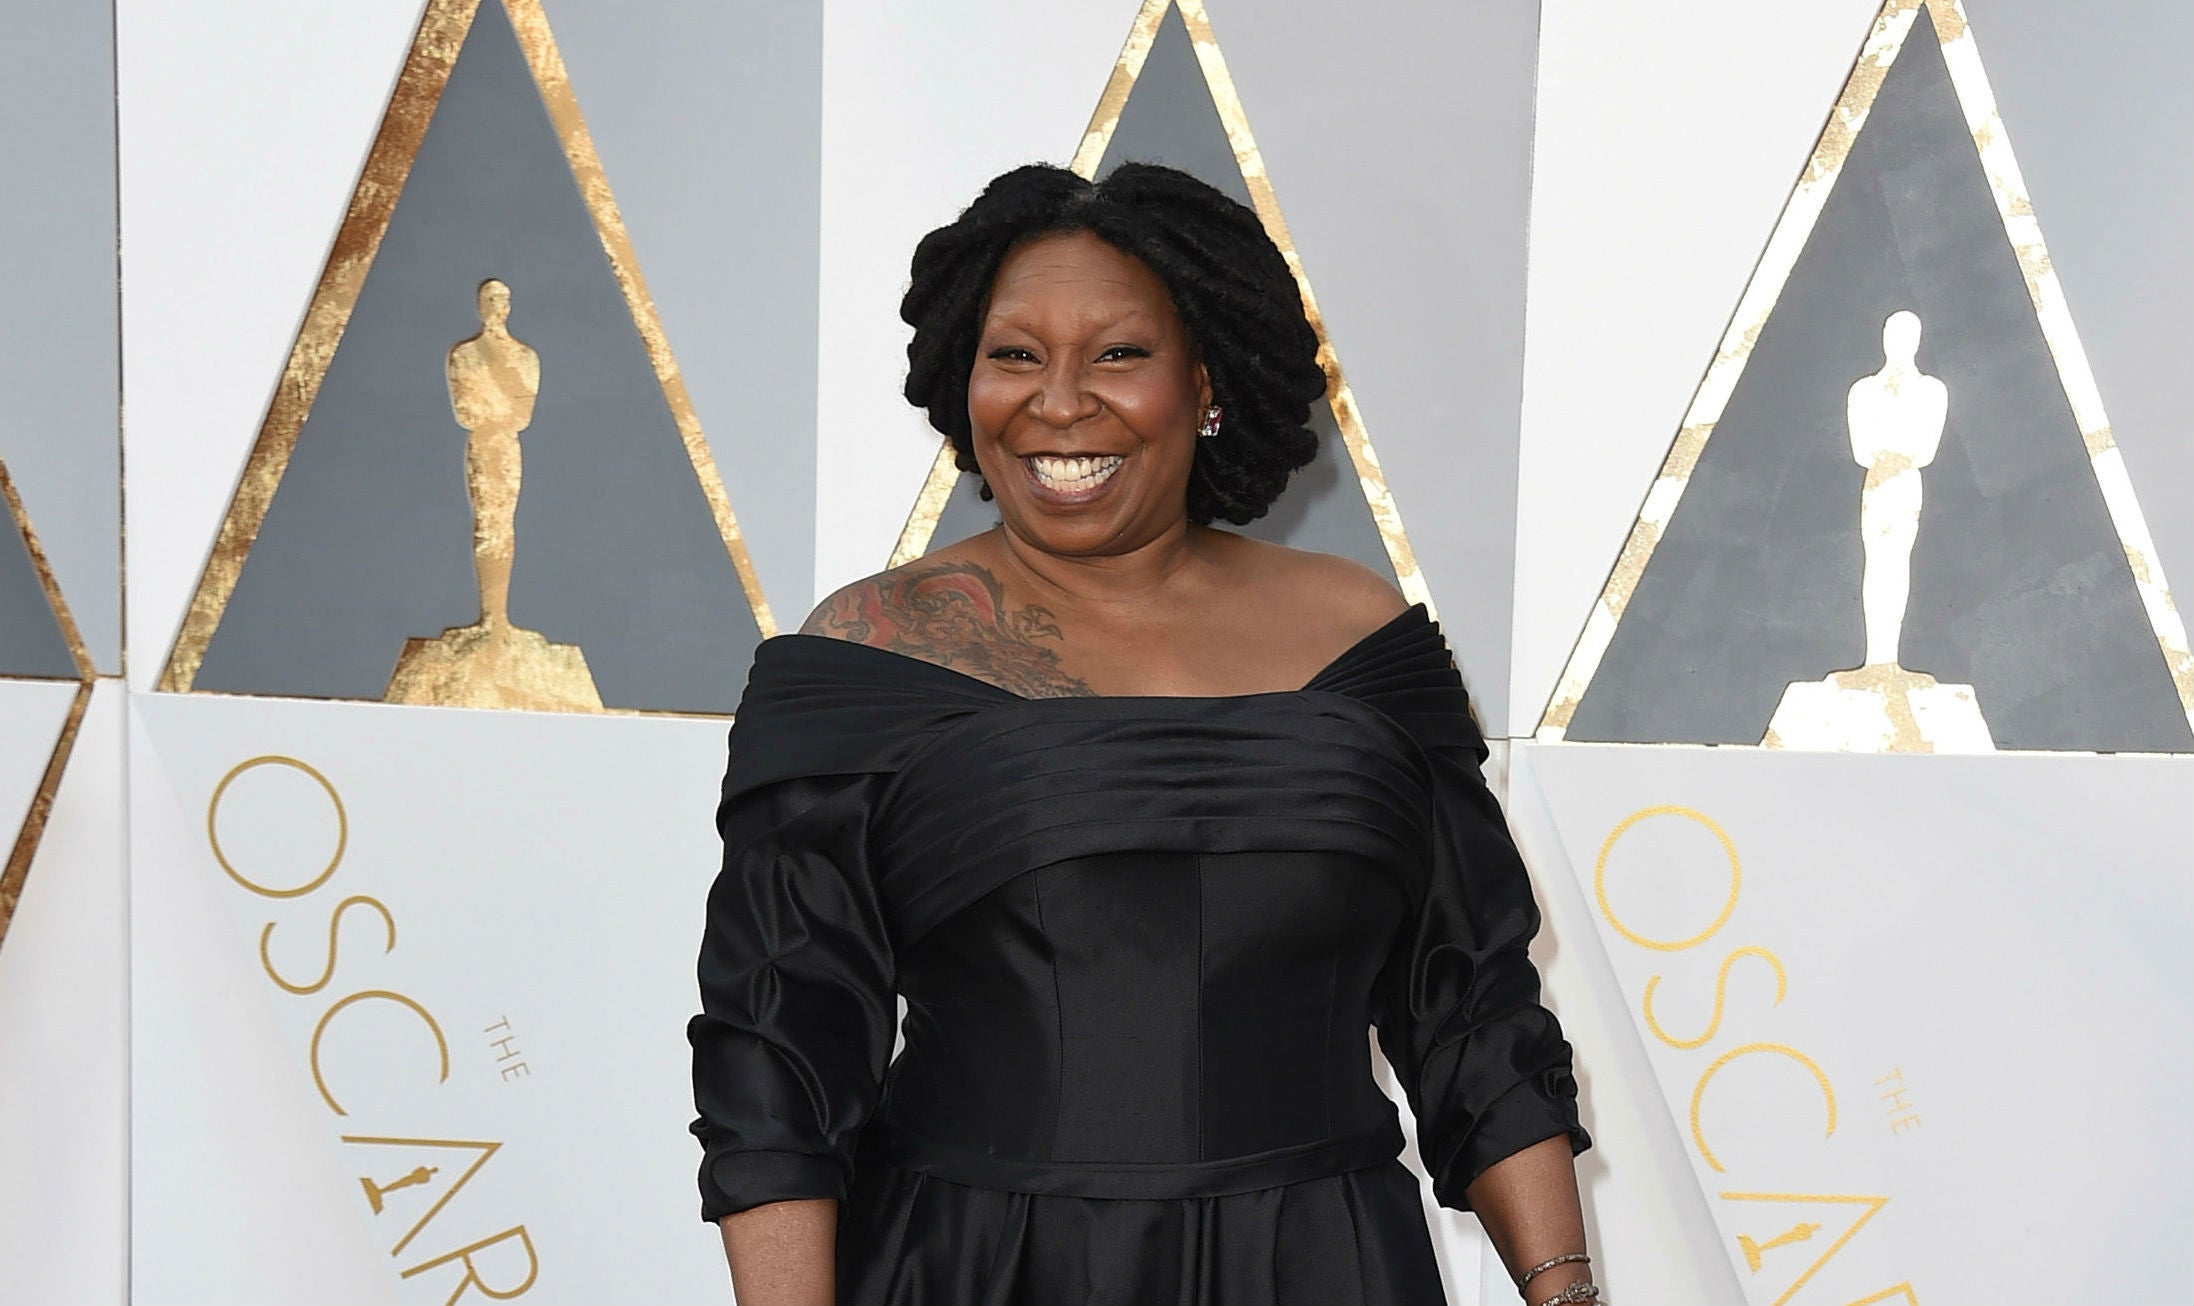 The beauty company mixed up Oprah and Whoopi Goldberg